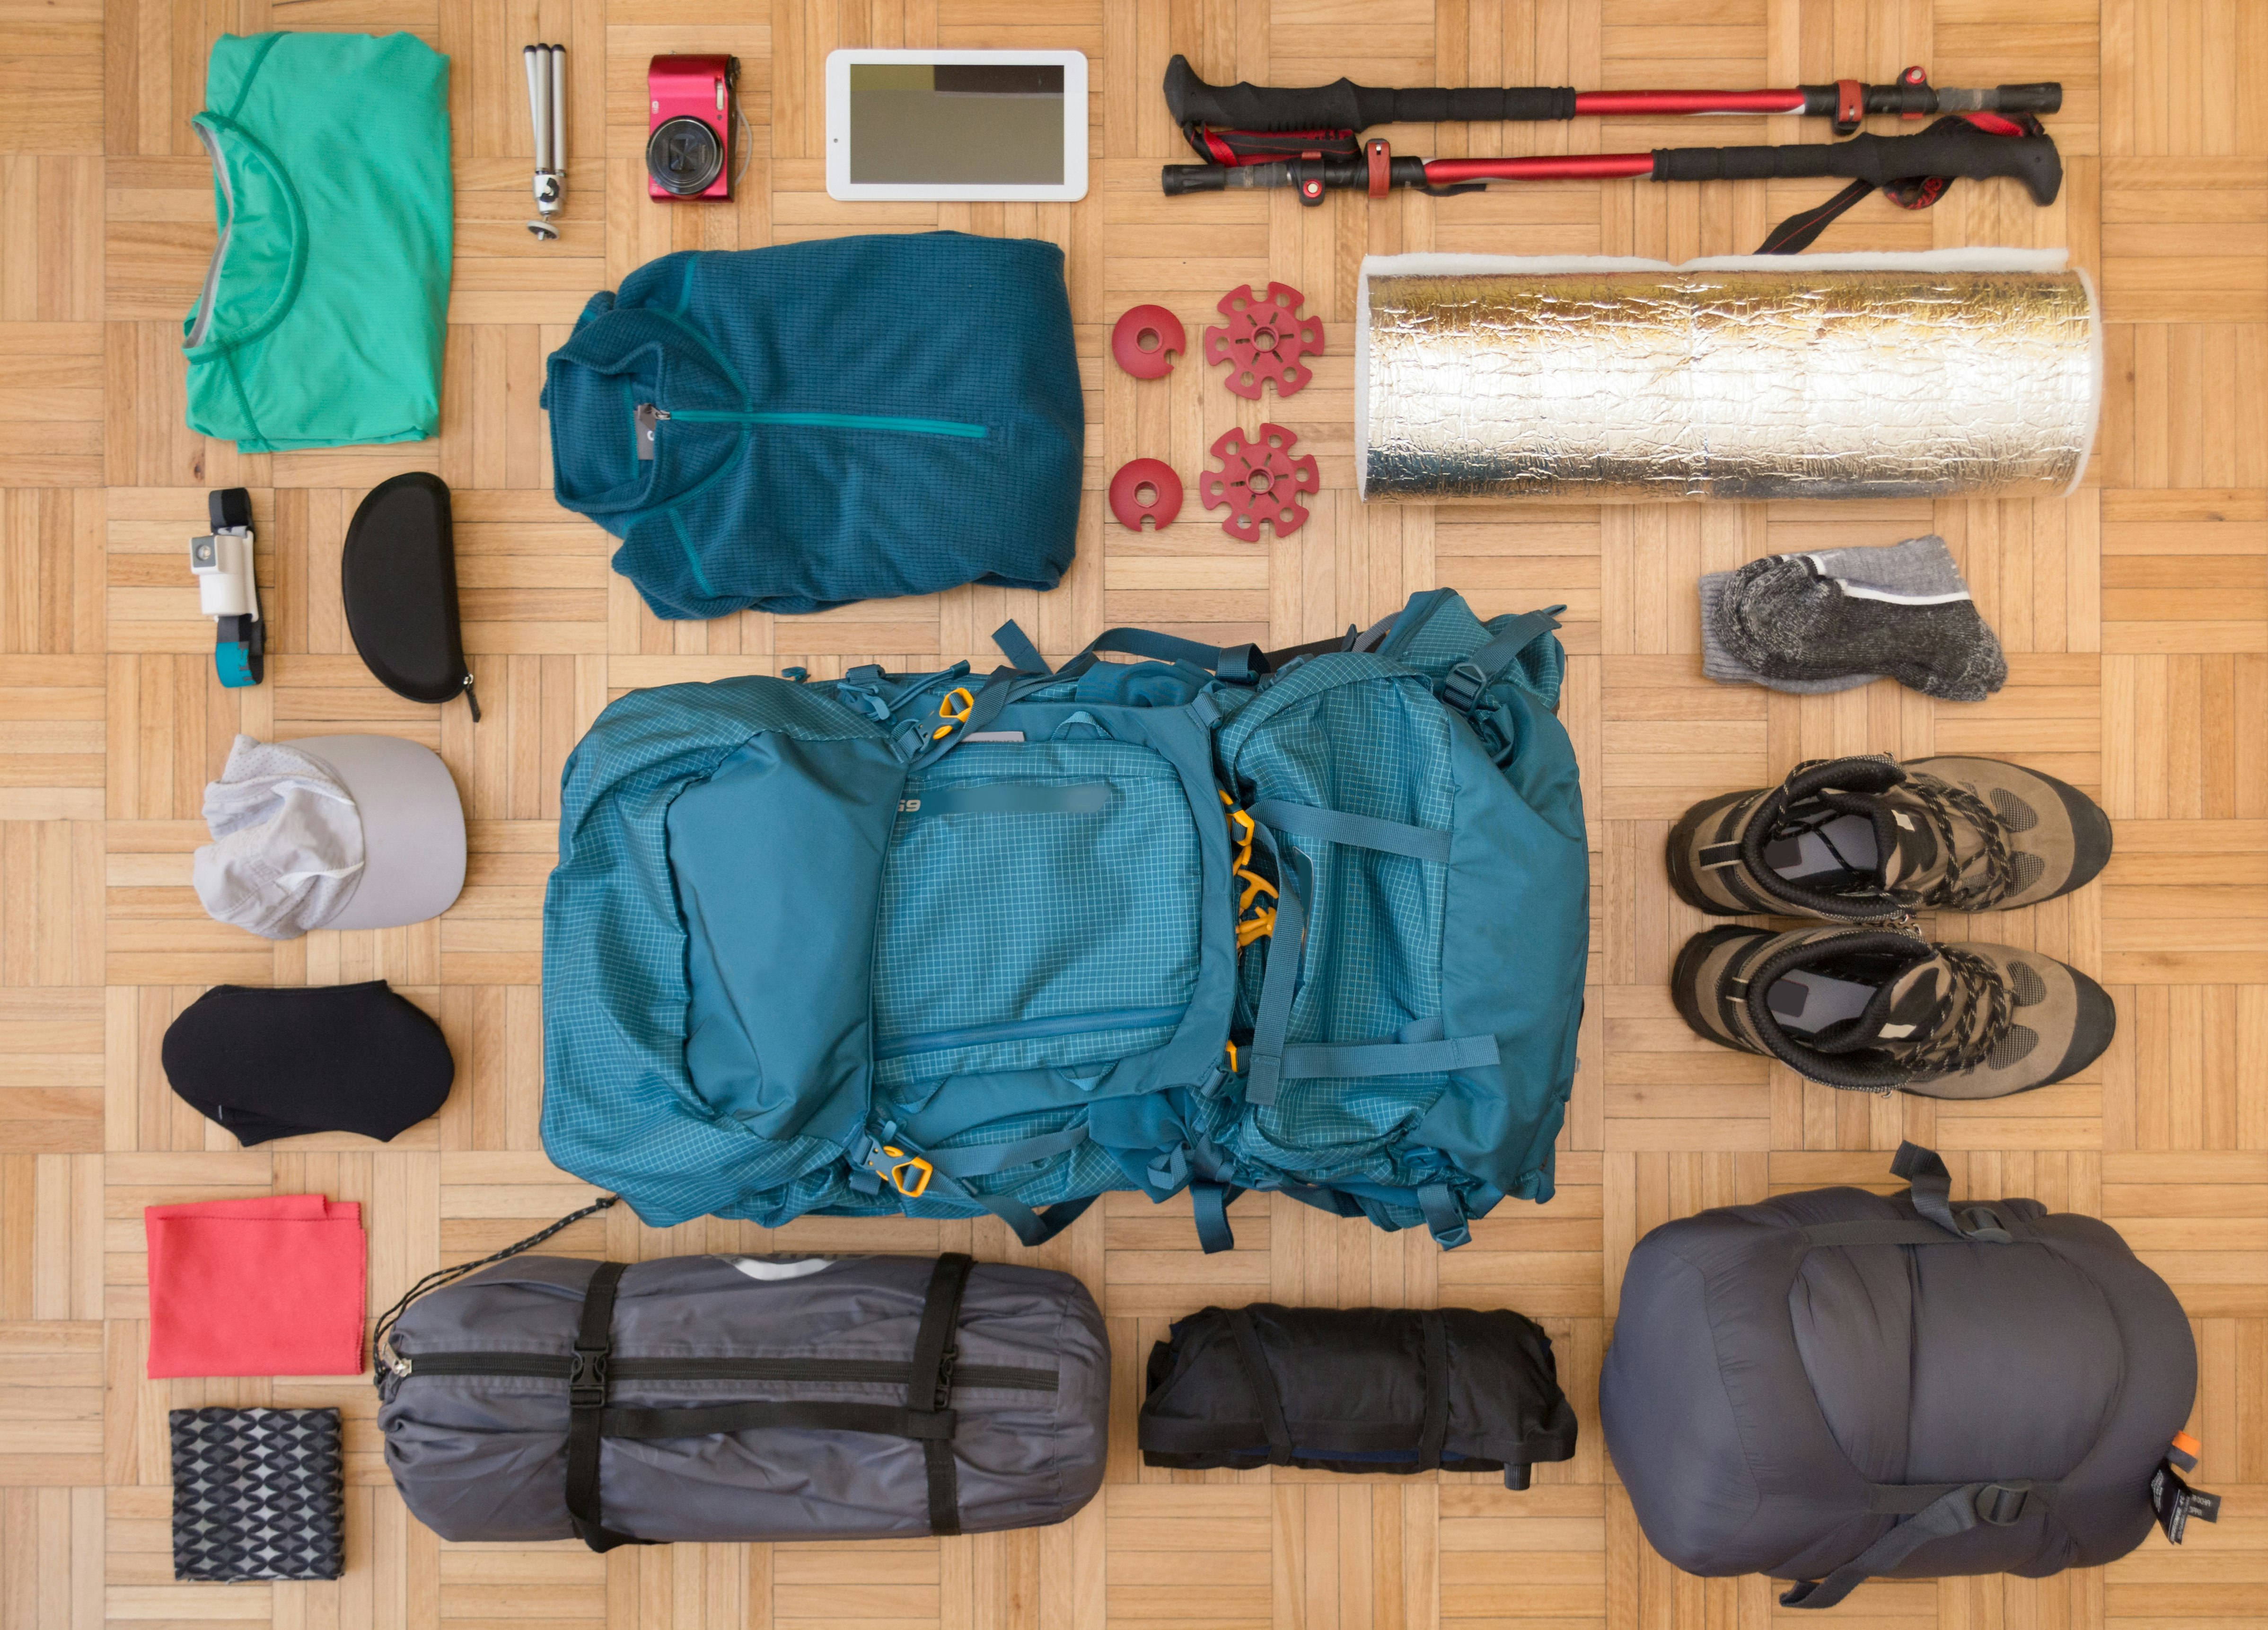 Individual items in a camping kit, including a backpack, bedroll, tent in a bag, boots, trekking poles, etc, are laid out on a parquet floor and shot from above, flatlay style